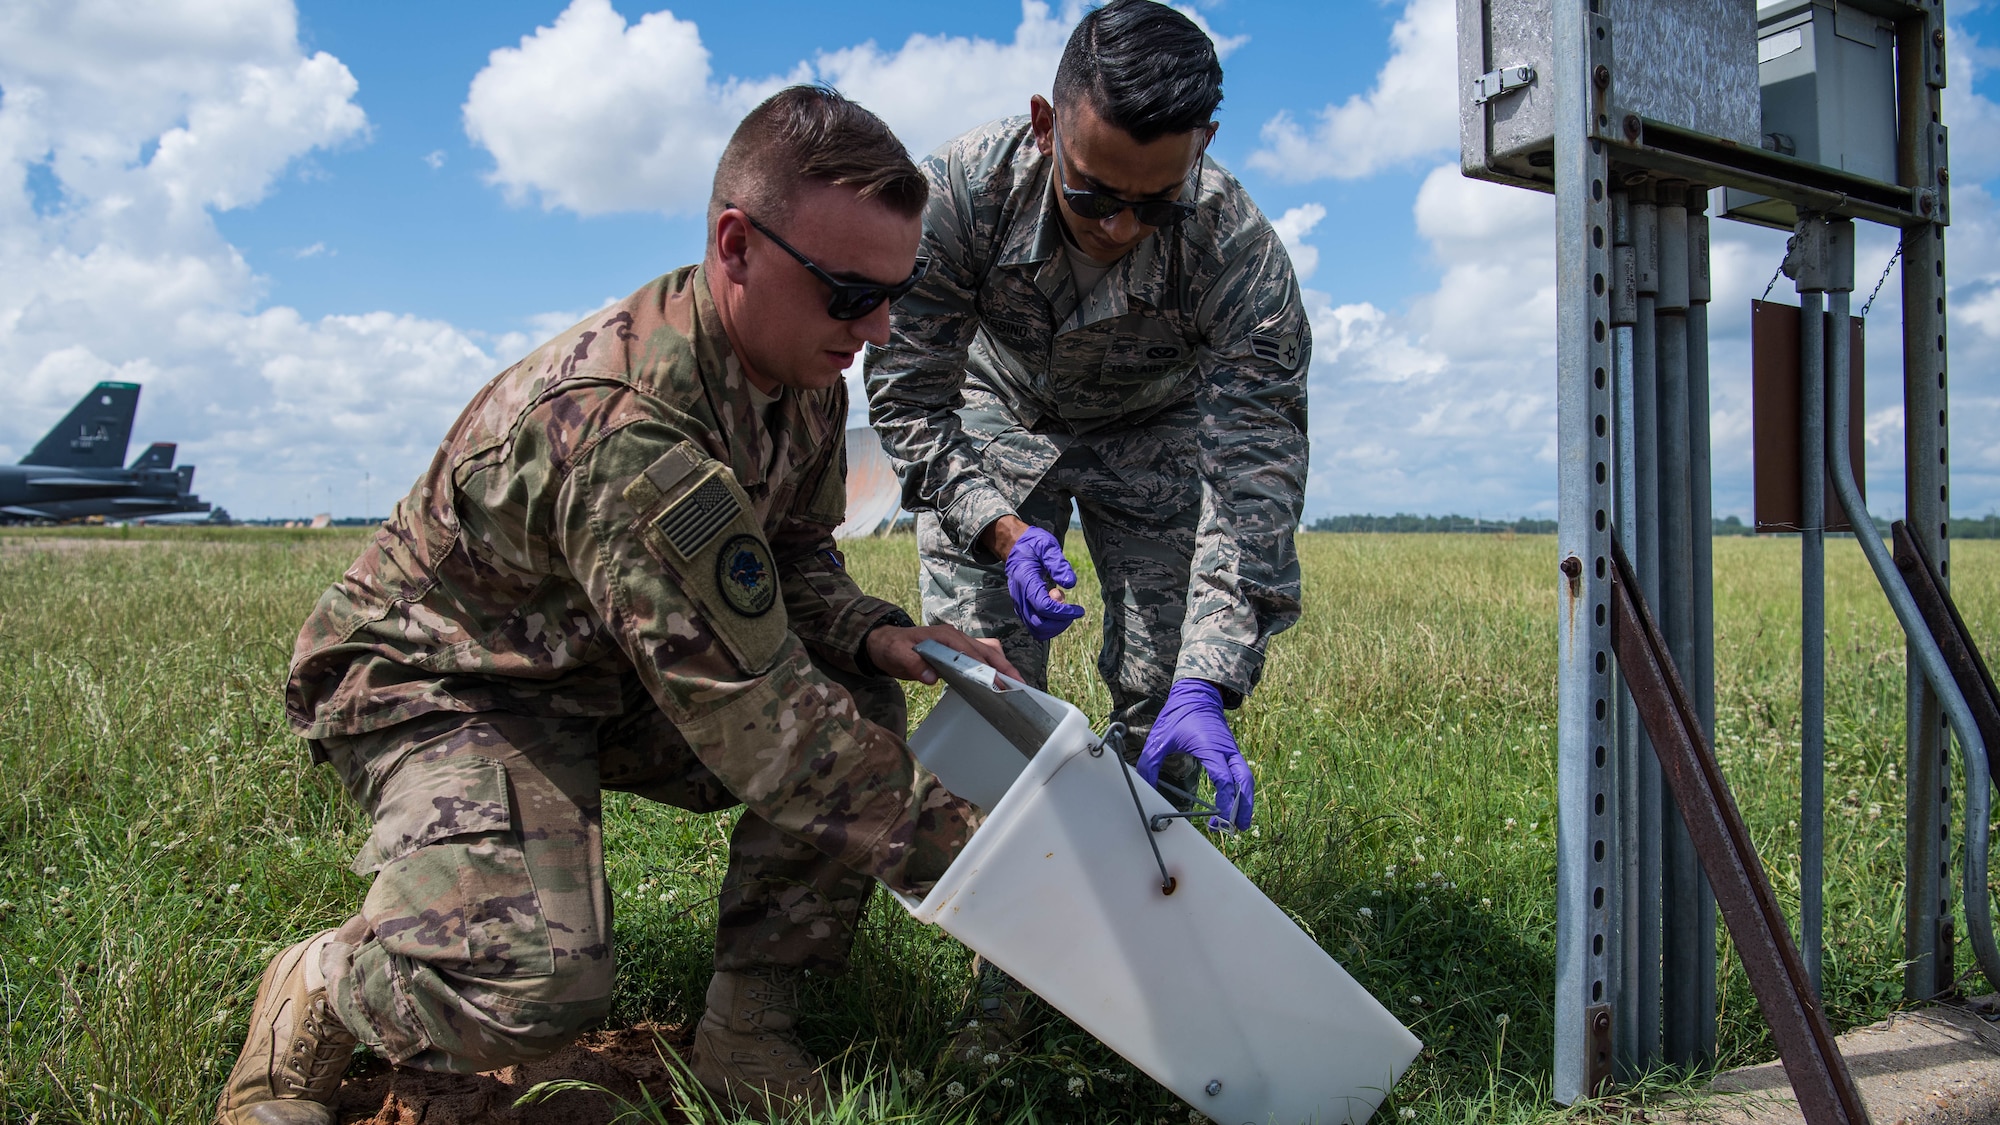 Staff Sgt. Christopher T. Cooper, 2nd Civil Engineer Squadron pest management journeyman, and Airman 1st Class Alberto Montesino (right), a 2nd CES pest management apprentice, set a skunk trap at Barksdale Air Force Base, Louisiana, June 6, 2019. Dealing with pests ranging from mosquitoes to wild dogs, the 2nd CES Ppest Mmanagement shop works to ensure no disease, injury or obstruction can hinder the safety of the mission, Airmen and their families. (U.S. Air Force photo by Airman Jacob B. Wrightsman)